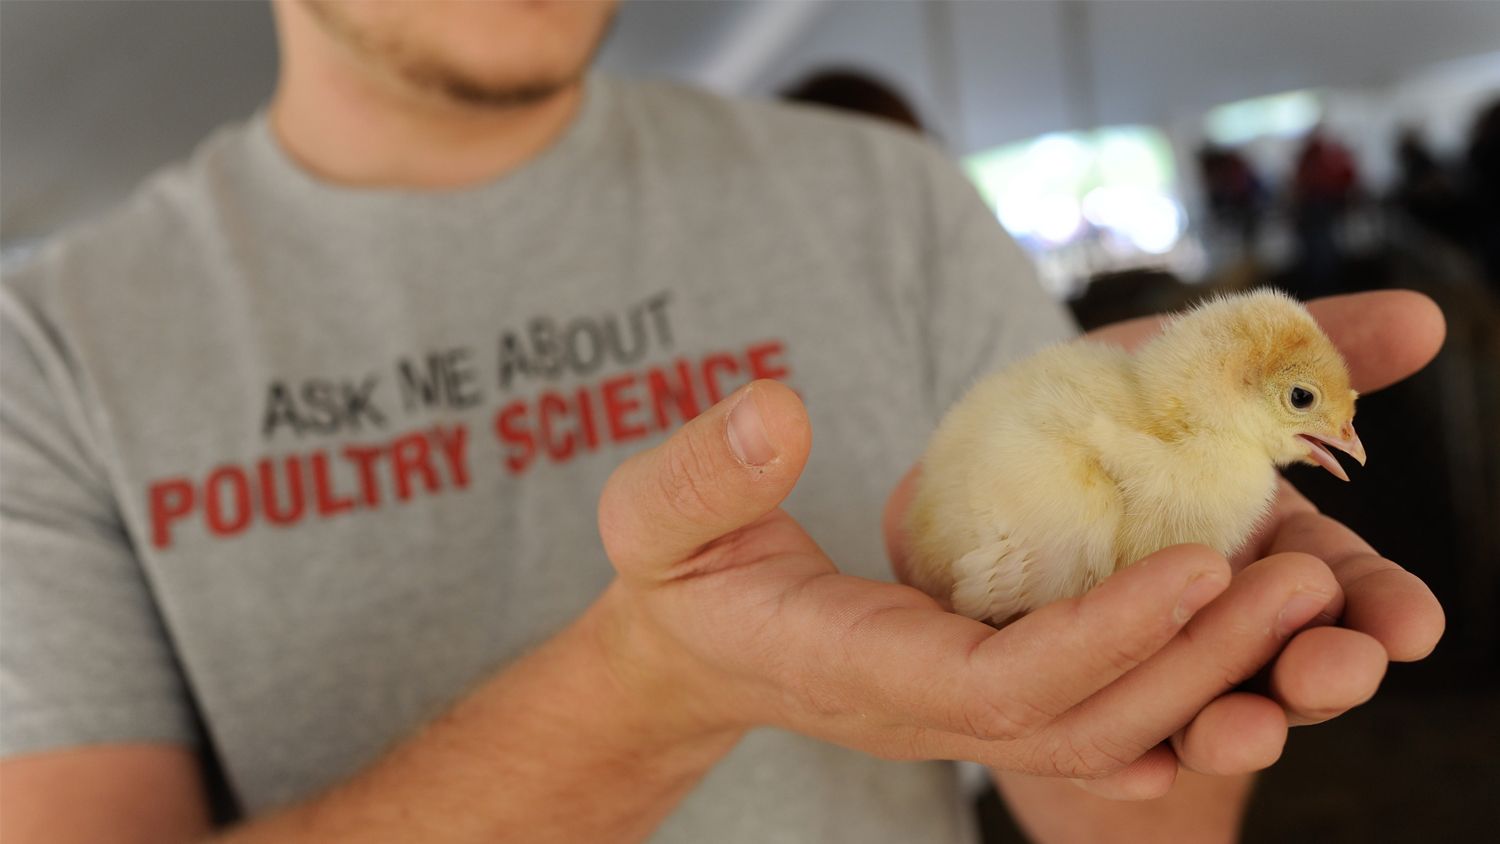 Student wearing Prestage "Ask Me About Poultry Science" t-shirt holding baby chick.